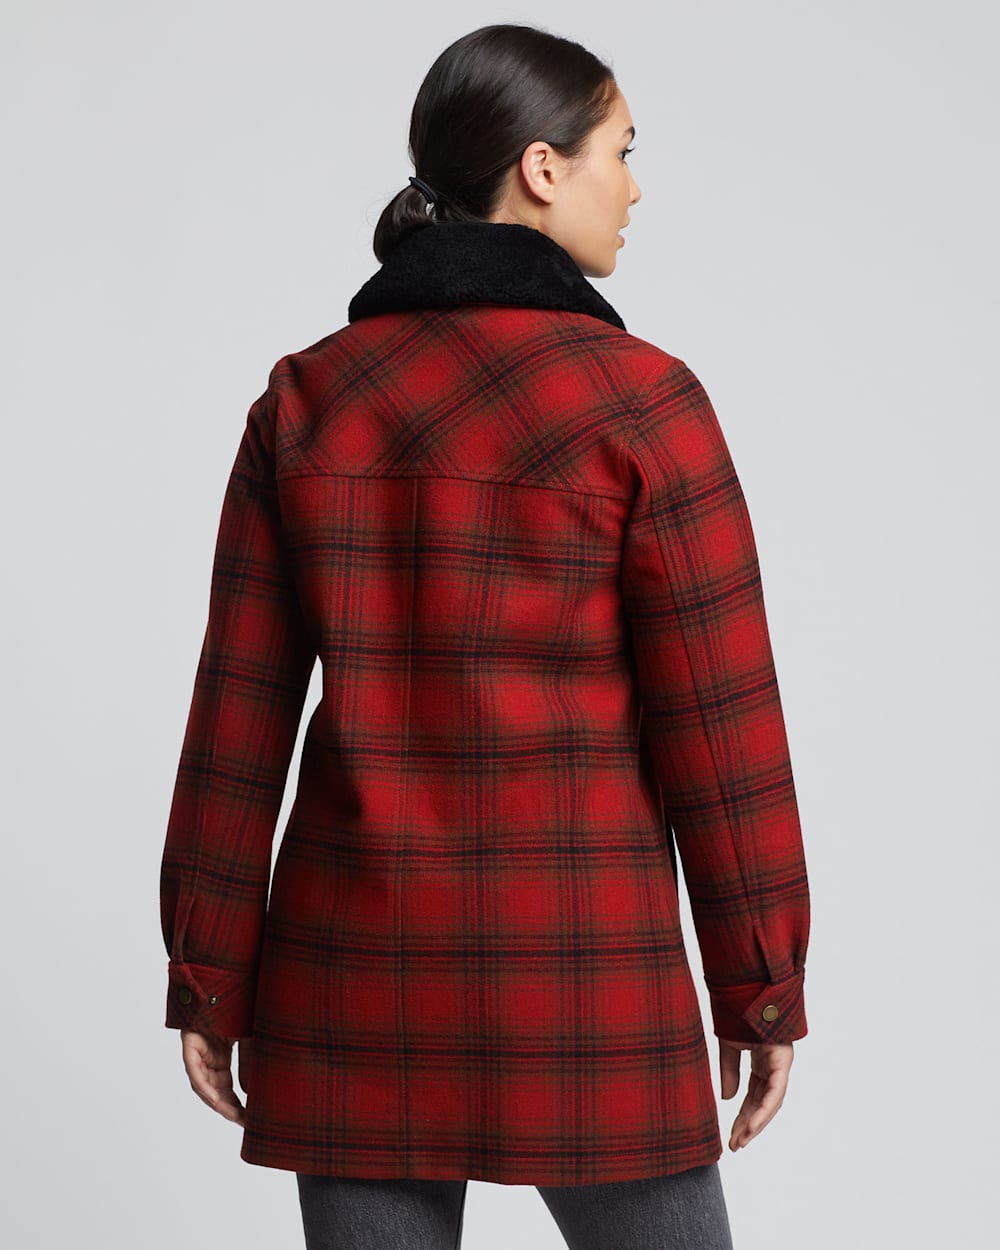 ALTERNATE VIEW OF WOMEN'S LAFAYETTE SHEARLING-COLLAR COAT IN RED/CHARCOAL/DEEP OLIVE PLAID image number 3